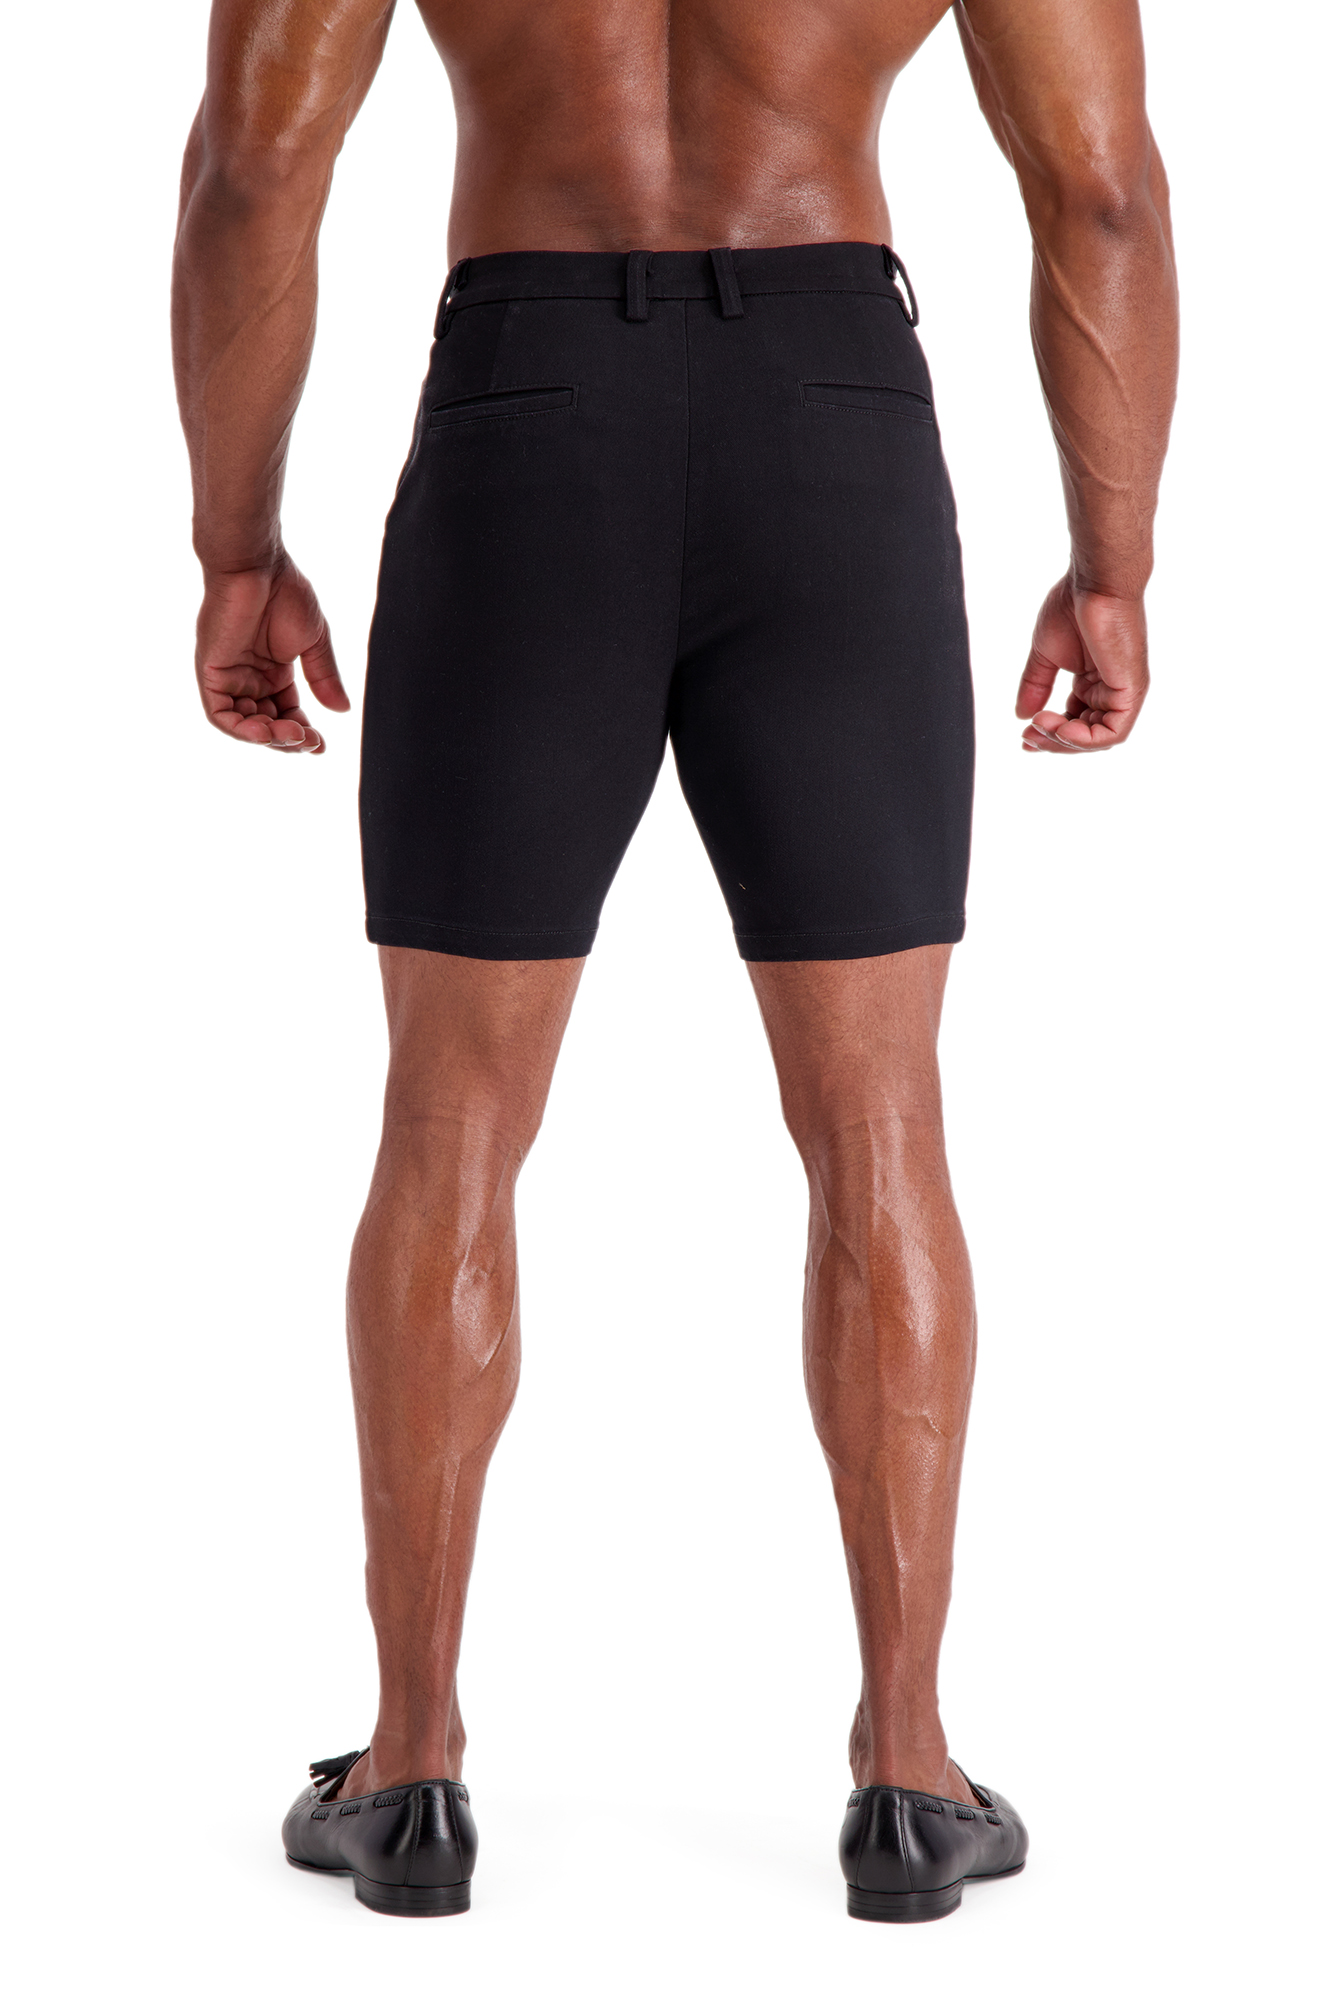 AG29 Muscle Fit Trouser Shorts - Black/Pintuck | Adonis Gear